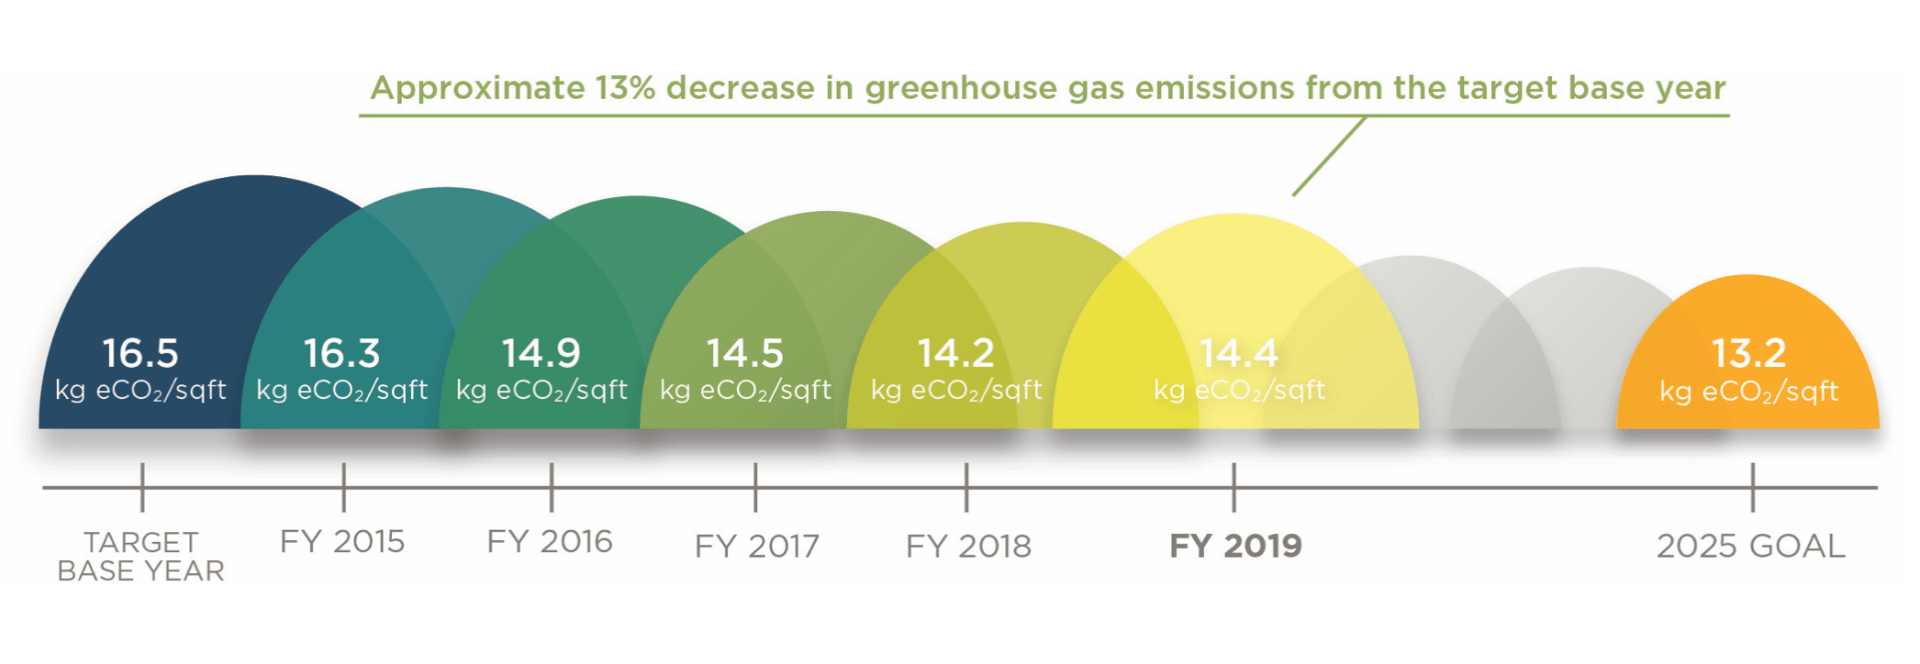 13% decrease in greenhouse gas emissions from the target base year